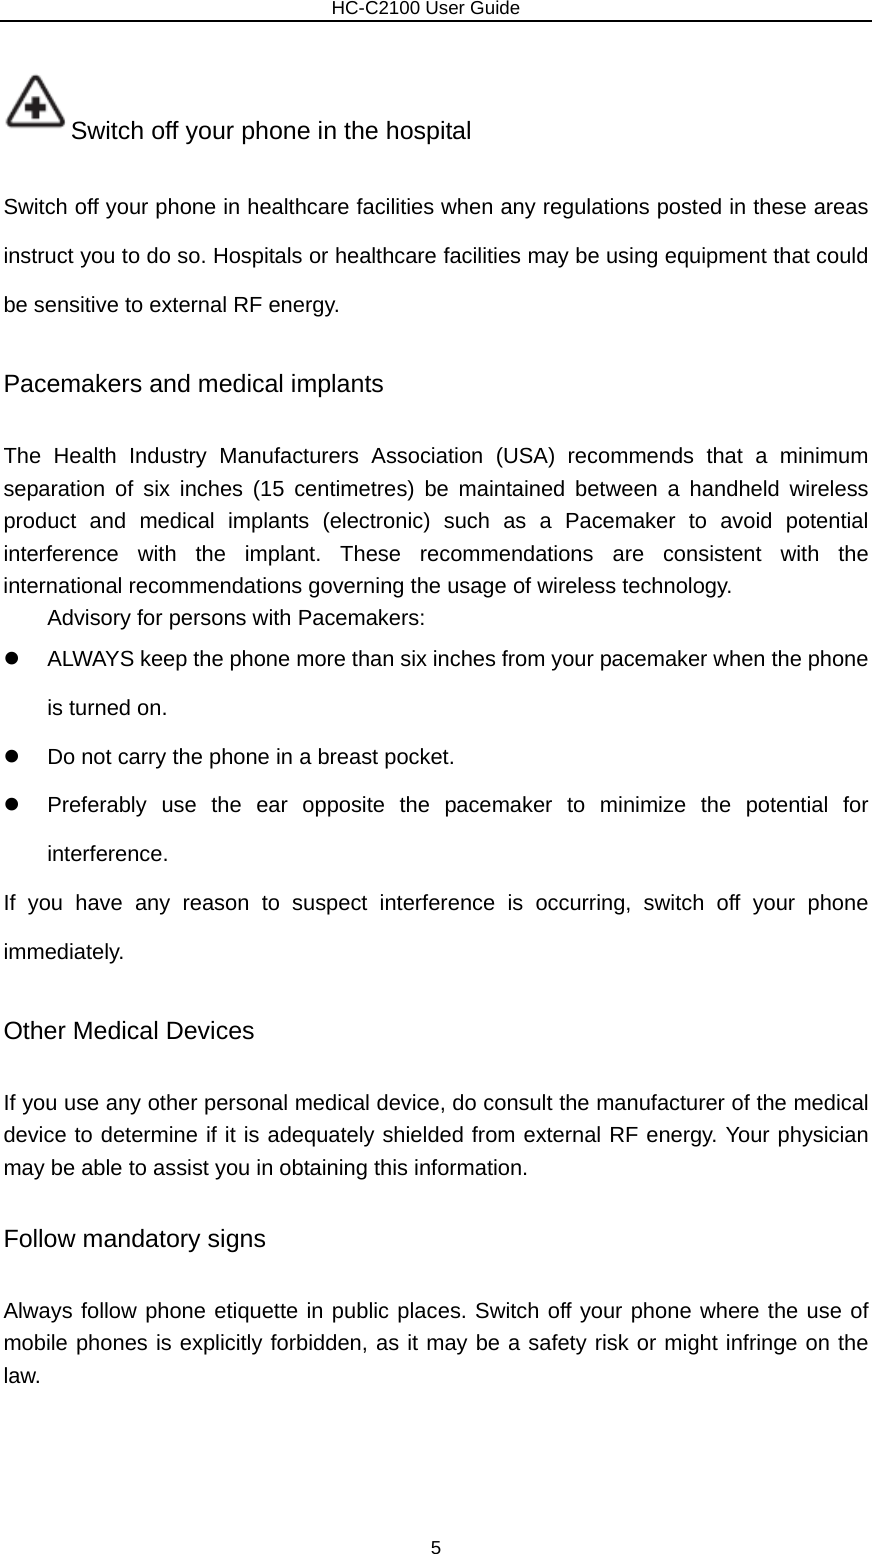                        HC-C2100 User Guide Switch off your phone in the hospital   Switch off your phone in healthcare facilities when any regulations posted in these areas instruct you to do so. Hospitals or healthcare facilities may be using equipment that could be sensitive to external RF energy. Pacemakers and medical implants The Health Industry Manufacturers Association (USA) recommends that a minimum separation of six inches (15 centimetres) be maintained between a handheld wireless product and medical implants (electronic) such as a Pacemaker to avoid potential interference with the implant. These recommendations are consistent with the international recommendations governing the usage of wireless technology. Advisory for persons with Pacemakers:   z  ALWAYS keep the phone more than six inches from your pacemaker when the phone is turned on. z  Do not carry the phone in a breast pocket. z  Preferably use the ear opposite the pacemaker to minimize the potential for interference. If you have any reason to suspect interference is occurring, switch off your phone immediately. Other Medical Devices If you use any other personal medical device, do consult the manufacturer of the medical device to determine if it is adequately shielded from external RF energy. Your physician may be able to assist you in obtaining this information.   Follow mandatory signs Always follow phone etiquette in public places. Switch off your phone where the use of mobile phones is explicitly forbidden, as it may be a safety risk or might infringe on the law. 5 